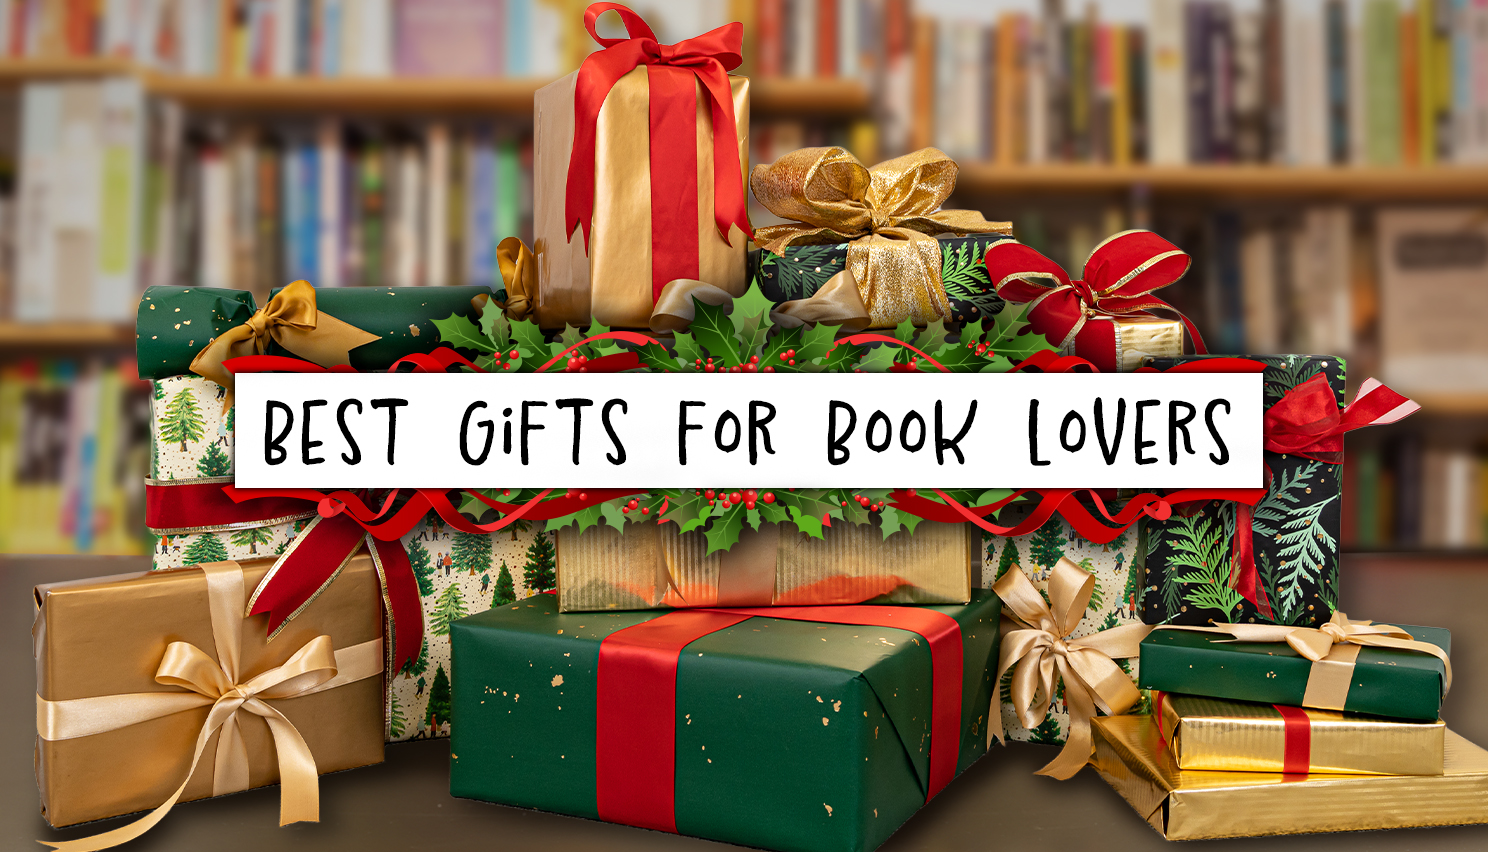 Perfectly Bookish - Best Unique Gifts for Book Lovers